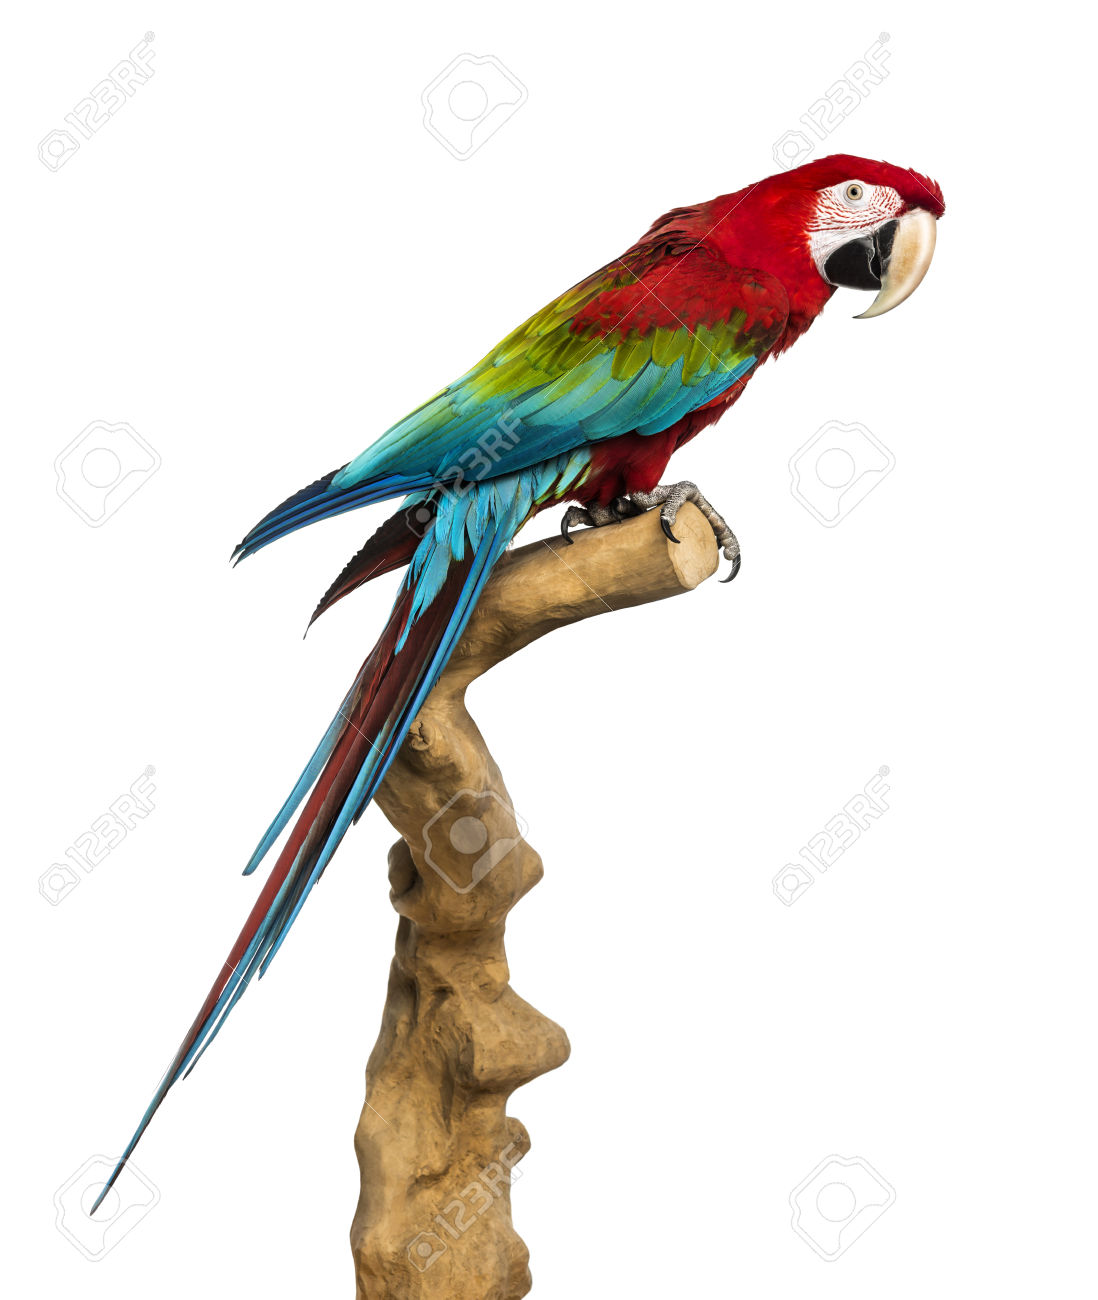 Images of Red-and-green Macaw | 1098x1300